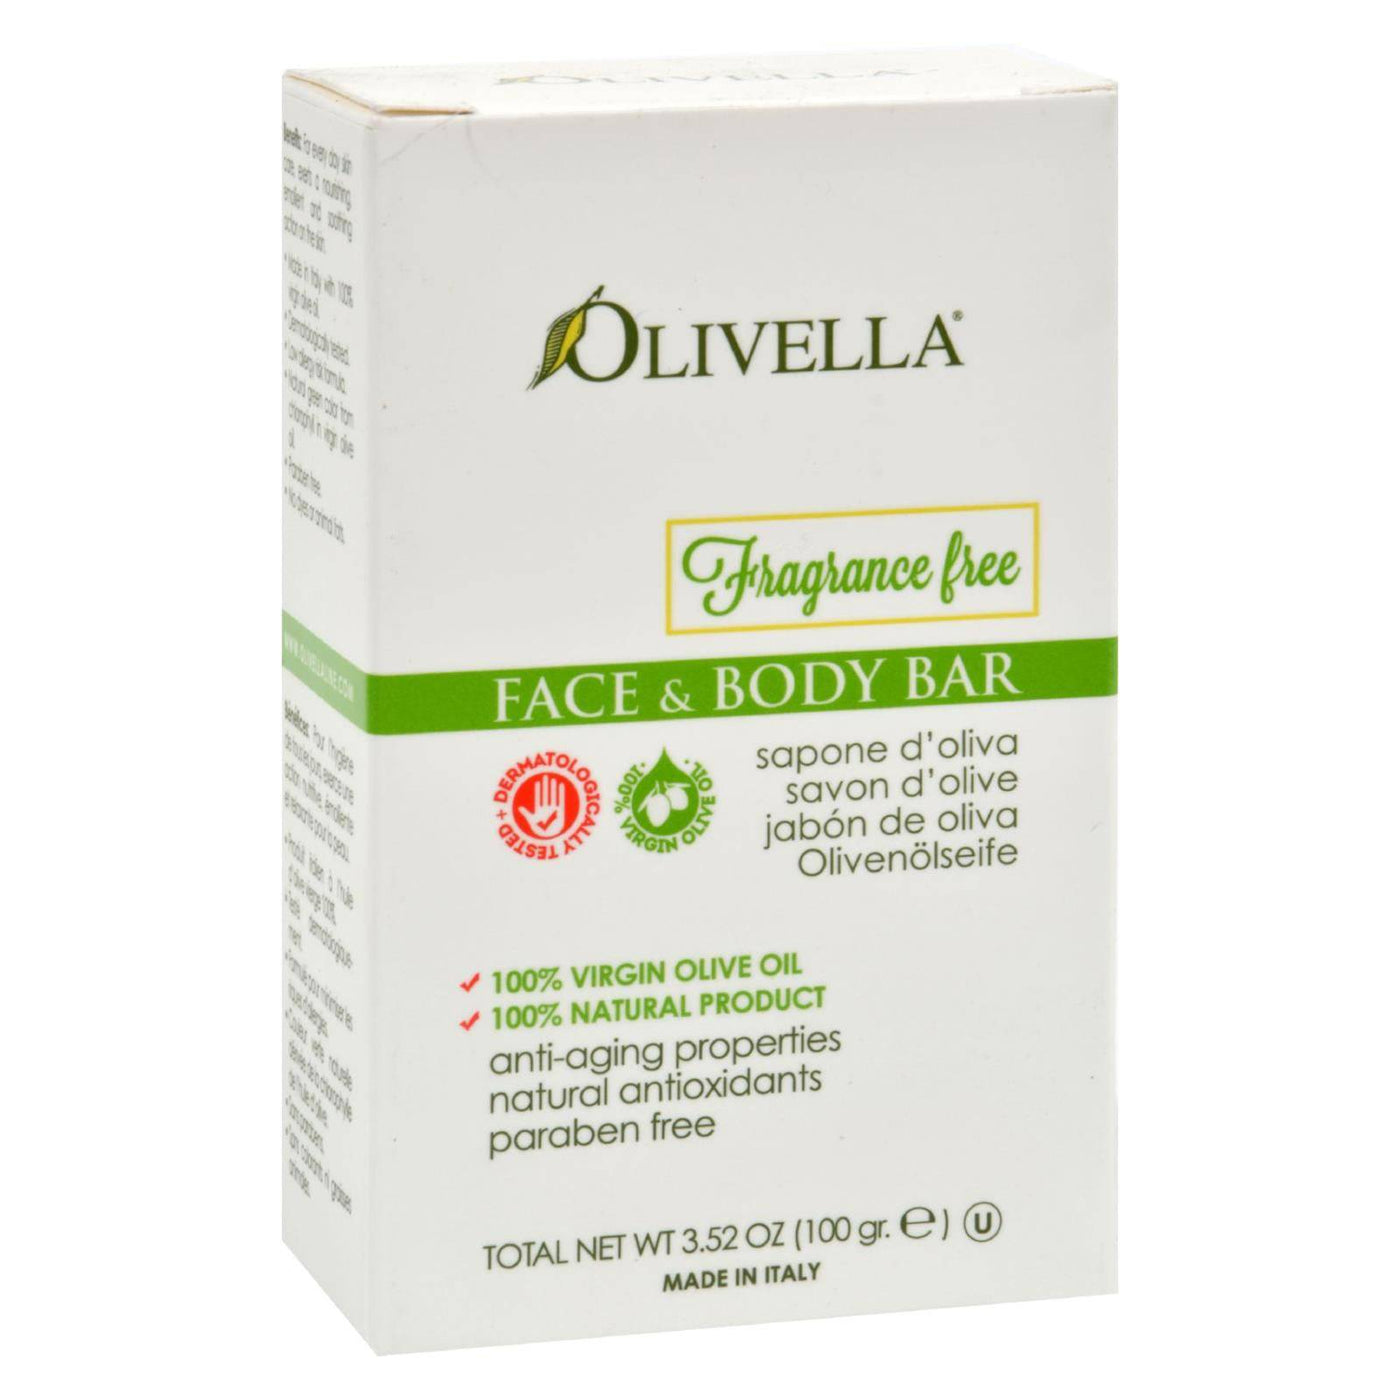 Olivella Fragrance Free Face And Body Bar - 3.52 Oz | OnlyNaturals.us